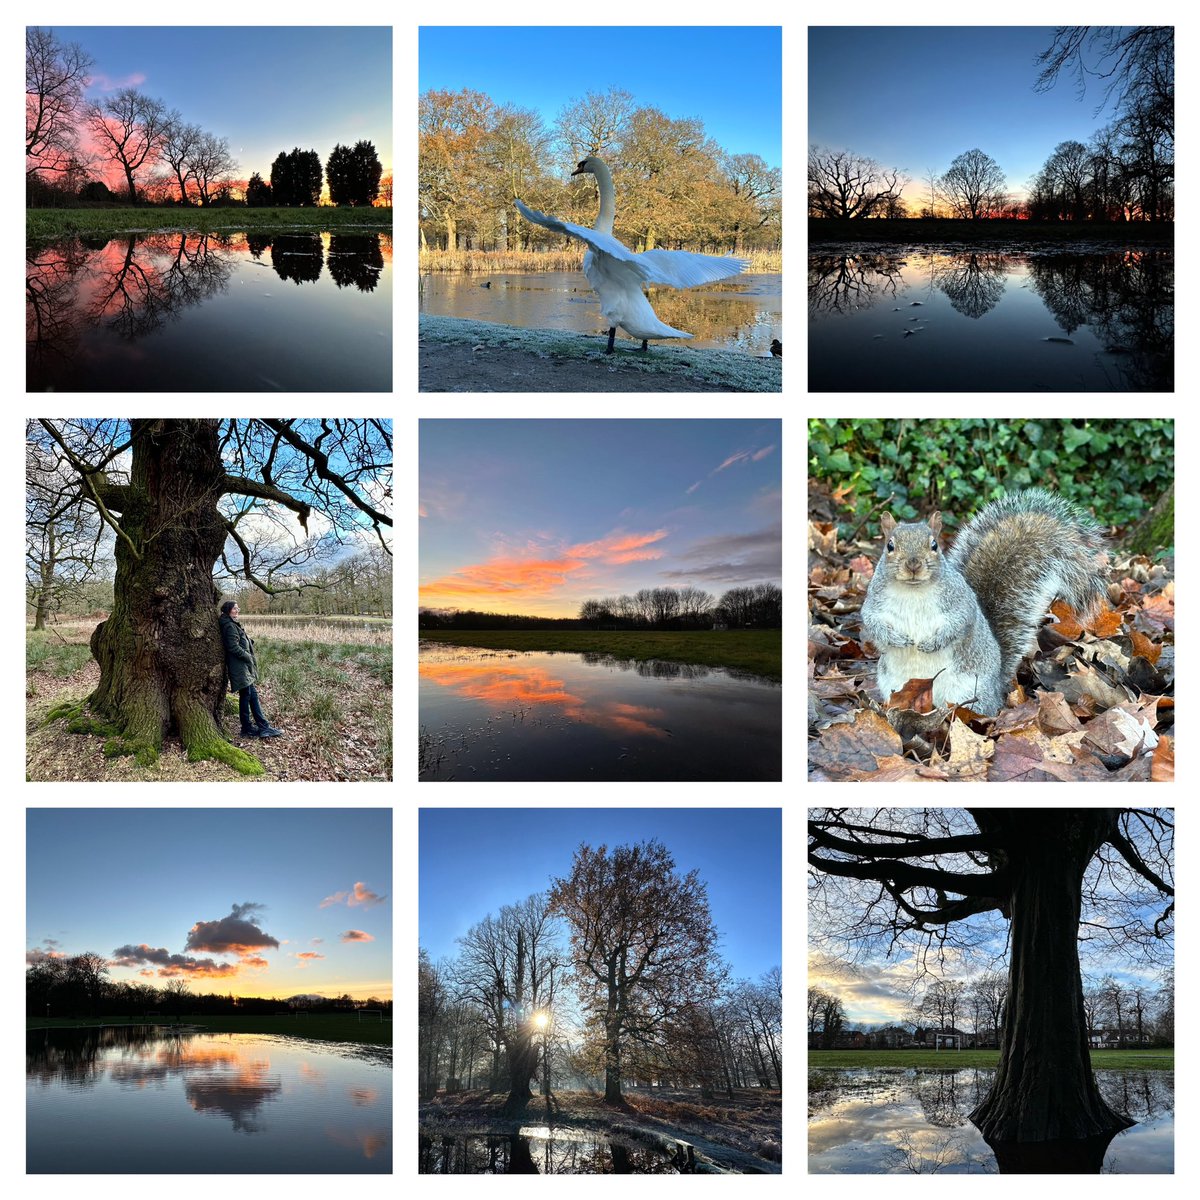 Finished work - return 8/1/24. Wishing everyone a relaxing #Christmas time as is possible. Images of places I work #outdoors : @OurTurnMoss @DunhamMasseyNT @Longford_Park #365dayswild #wellbeing #nature #therapy #mindfulness #therapistsconnect #selfcare #mentalhealth #health